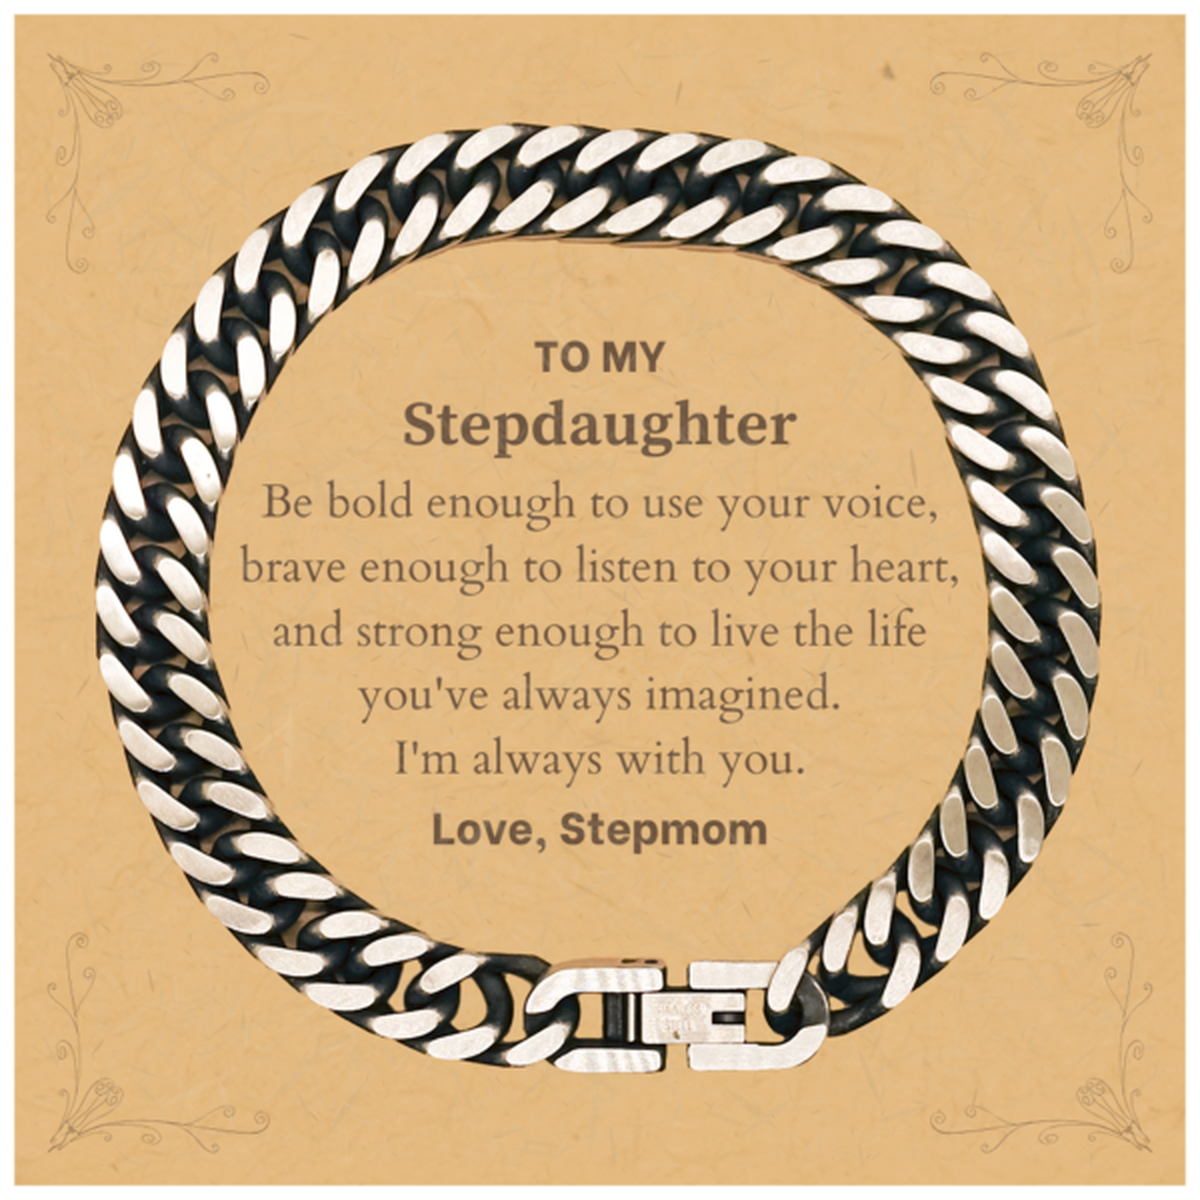 Keepsake Stepdaughter Cuban Link Chain Bracelet Gift Idea Graduation Christmas Birthday Stepdaughter from Stepmom, Stepdaughter Be bold enough to use your voice, brave enough to listen to your heart. Love, Stepmom